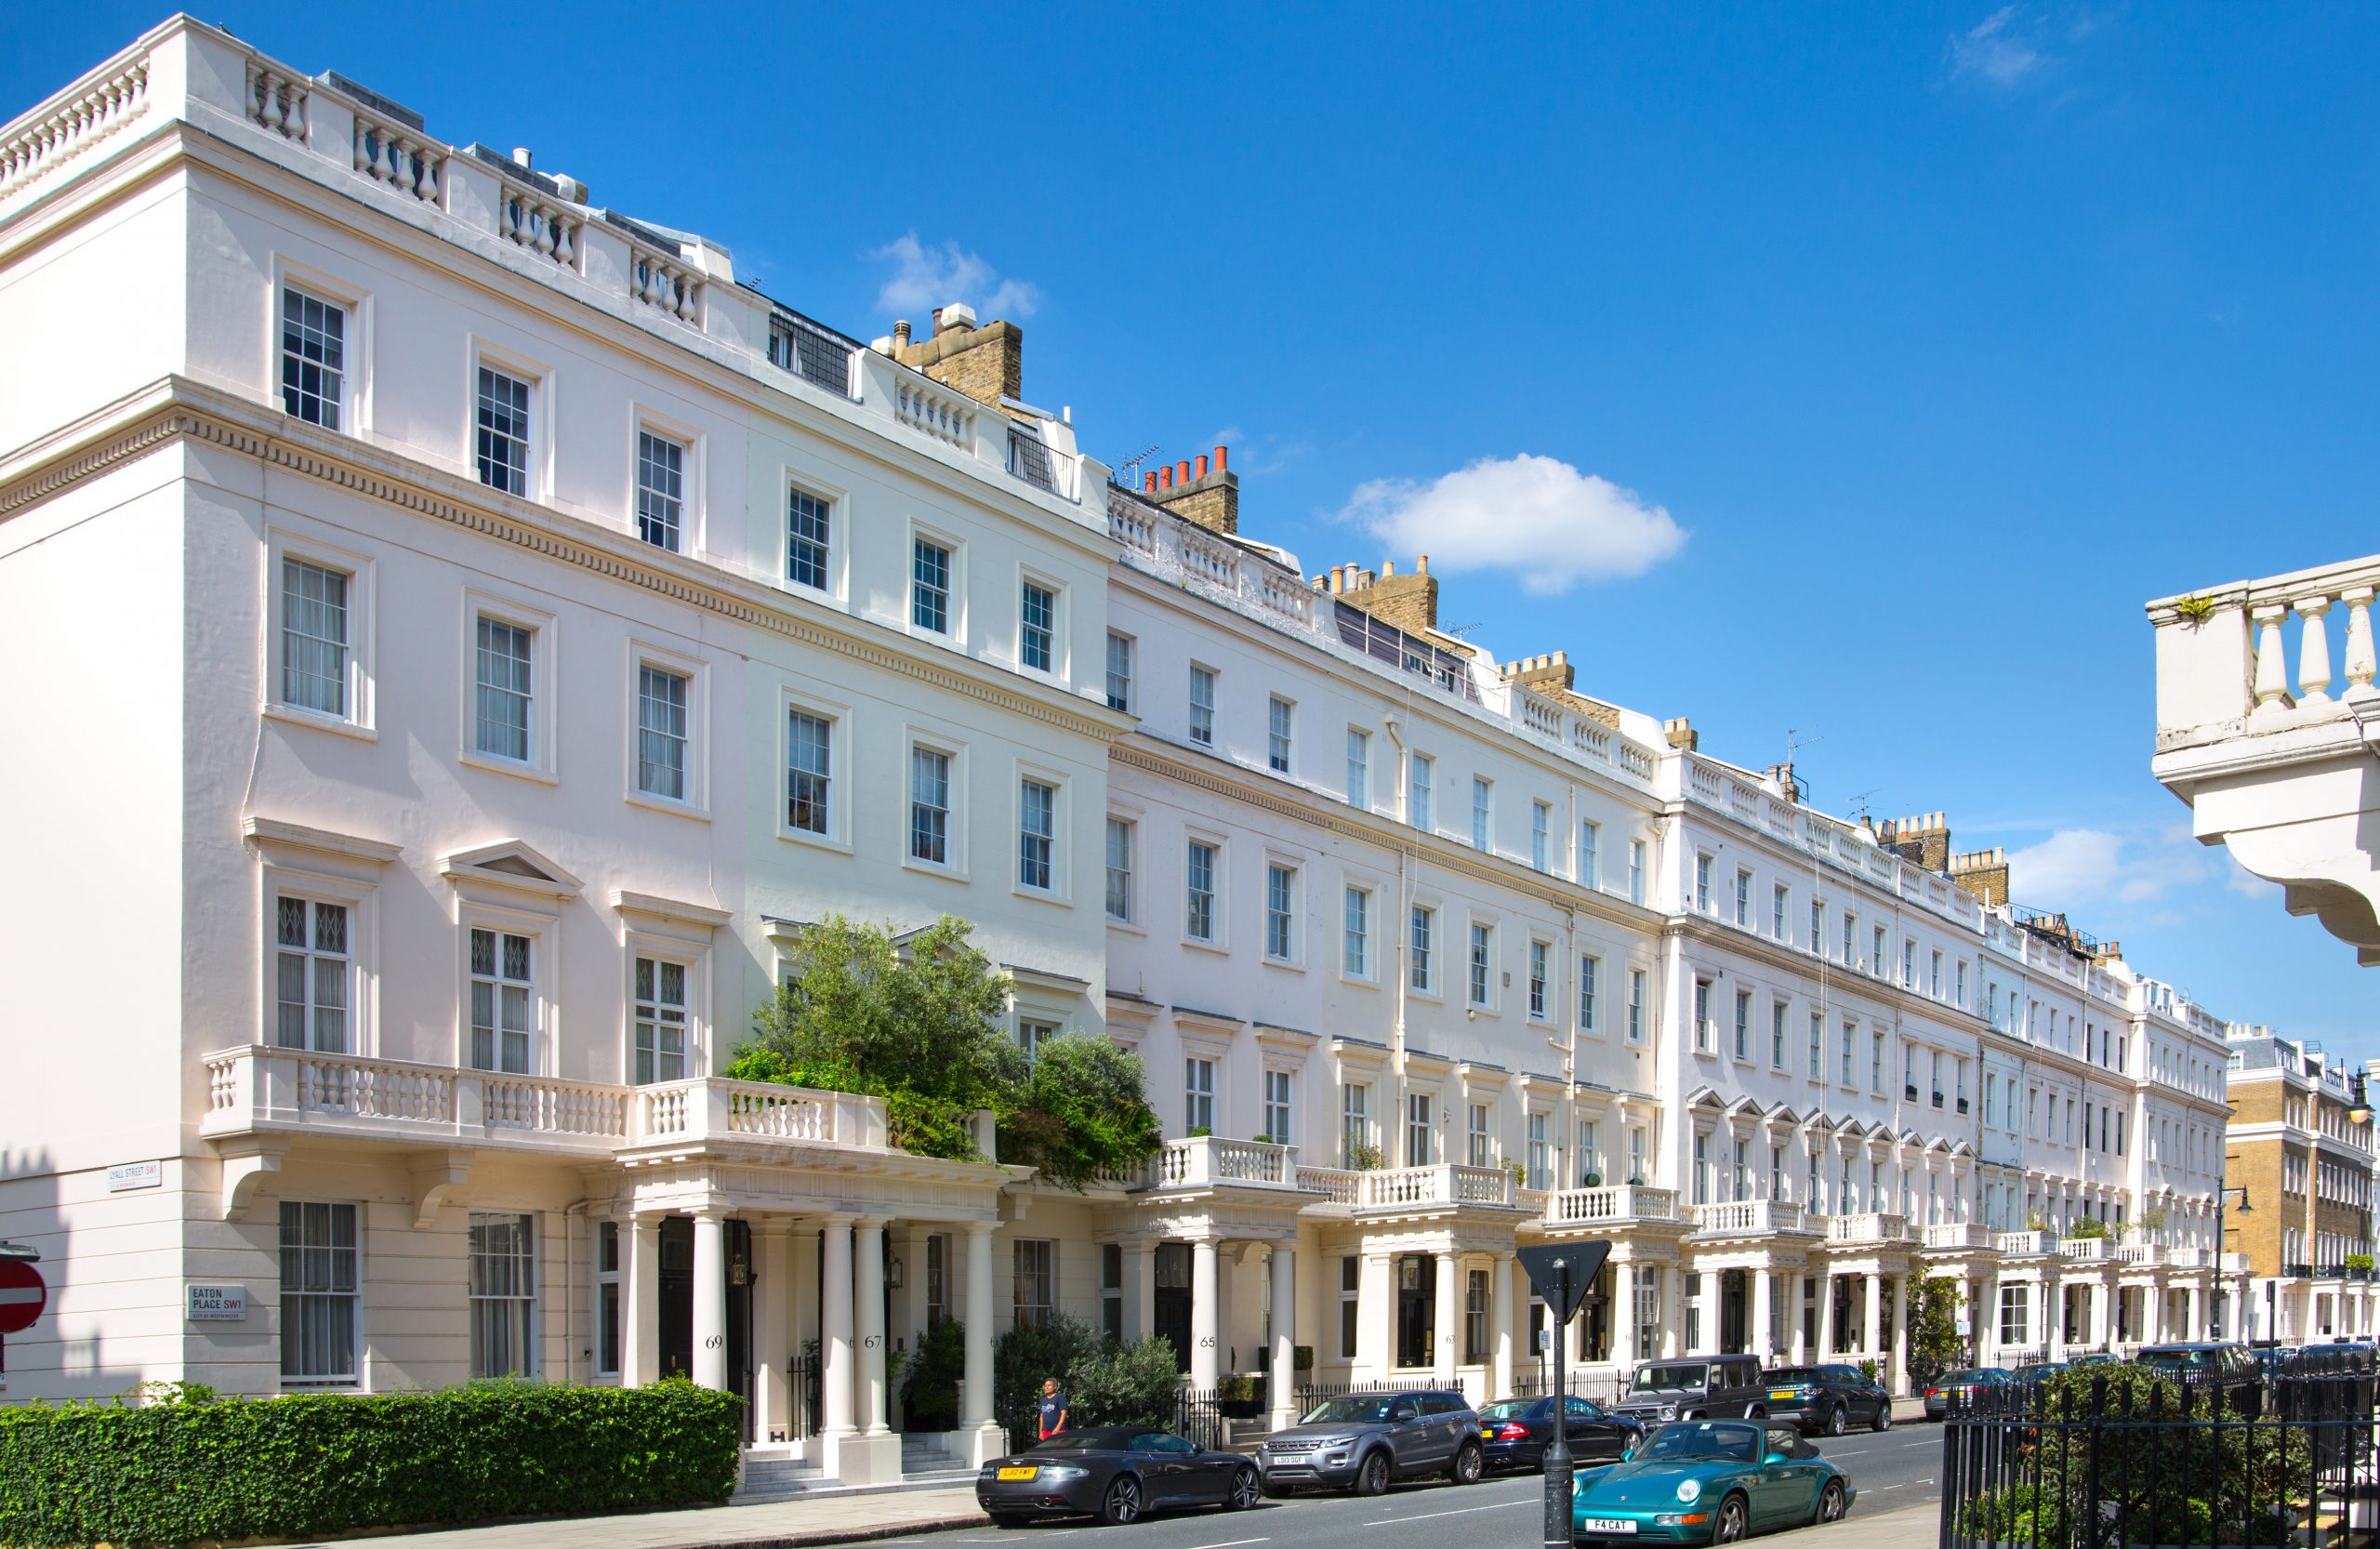 Demand returns to the prime London rental market - Alford Hughes Insights